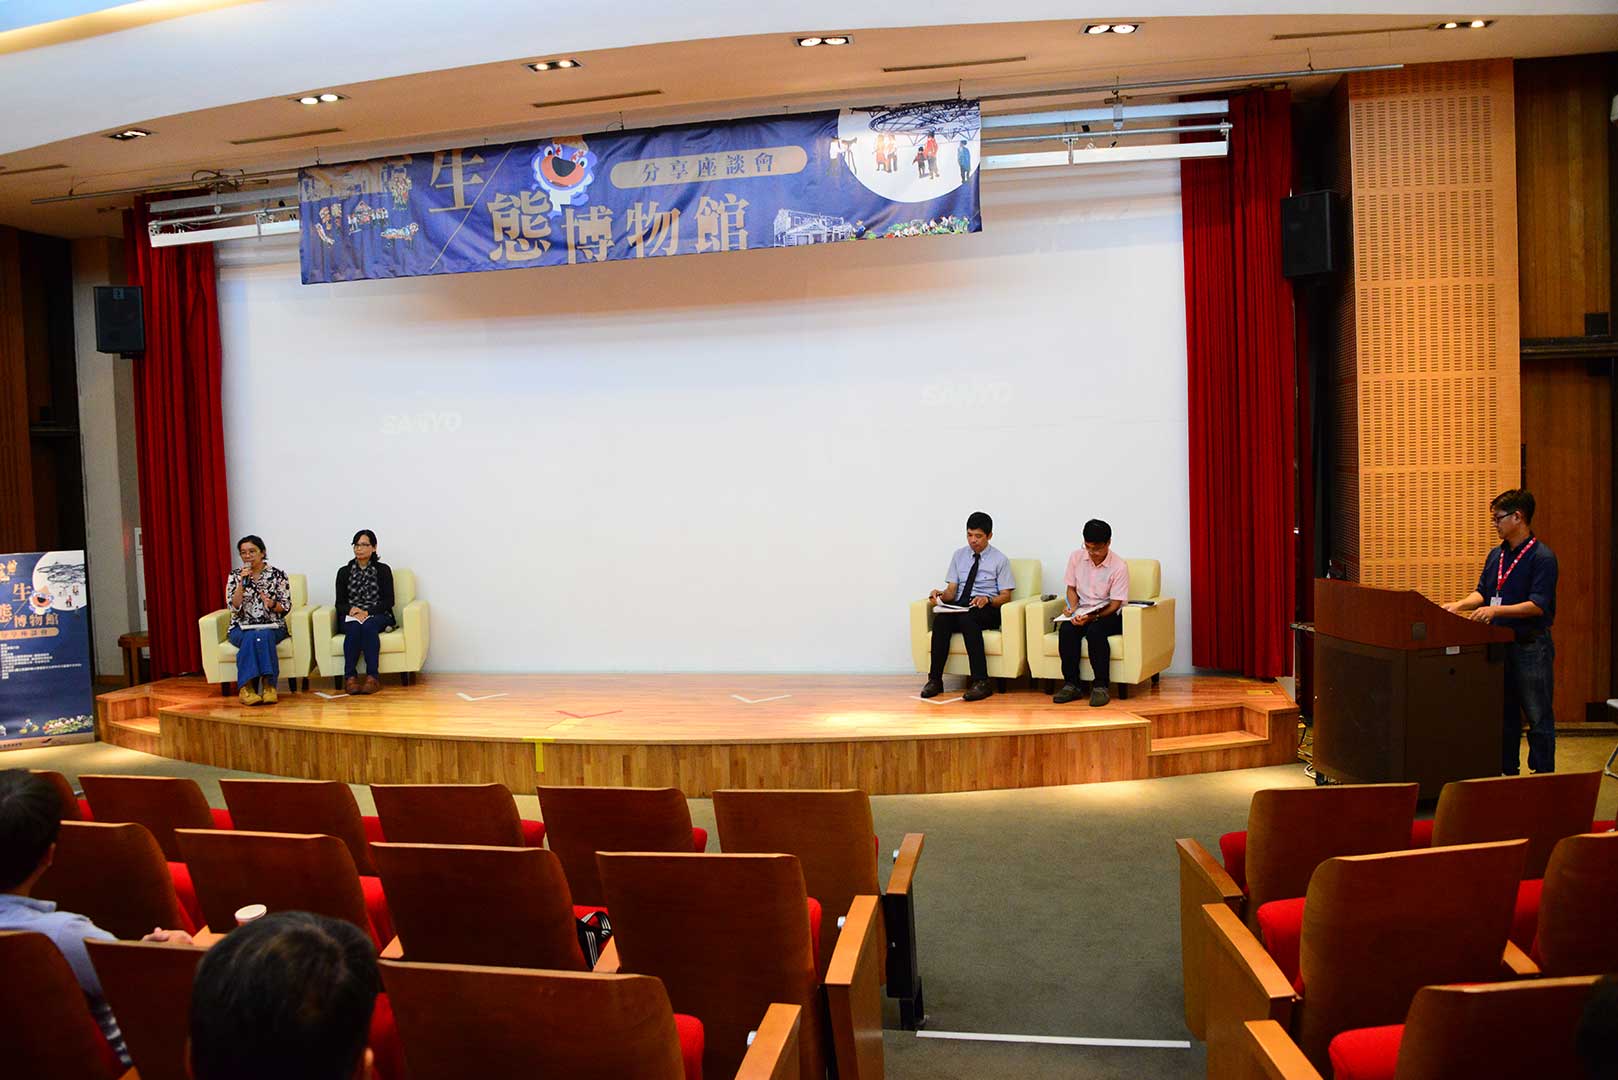 The forum for sharing and the lecturer Xin-Lan Hong